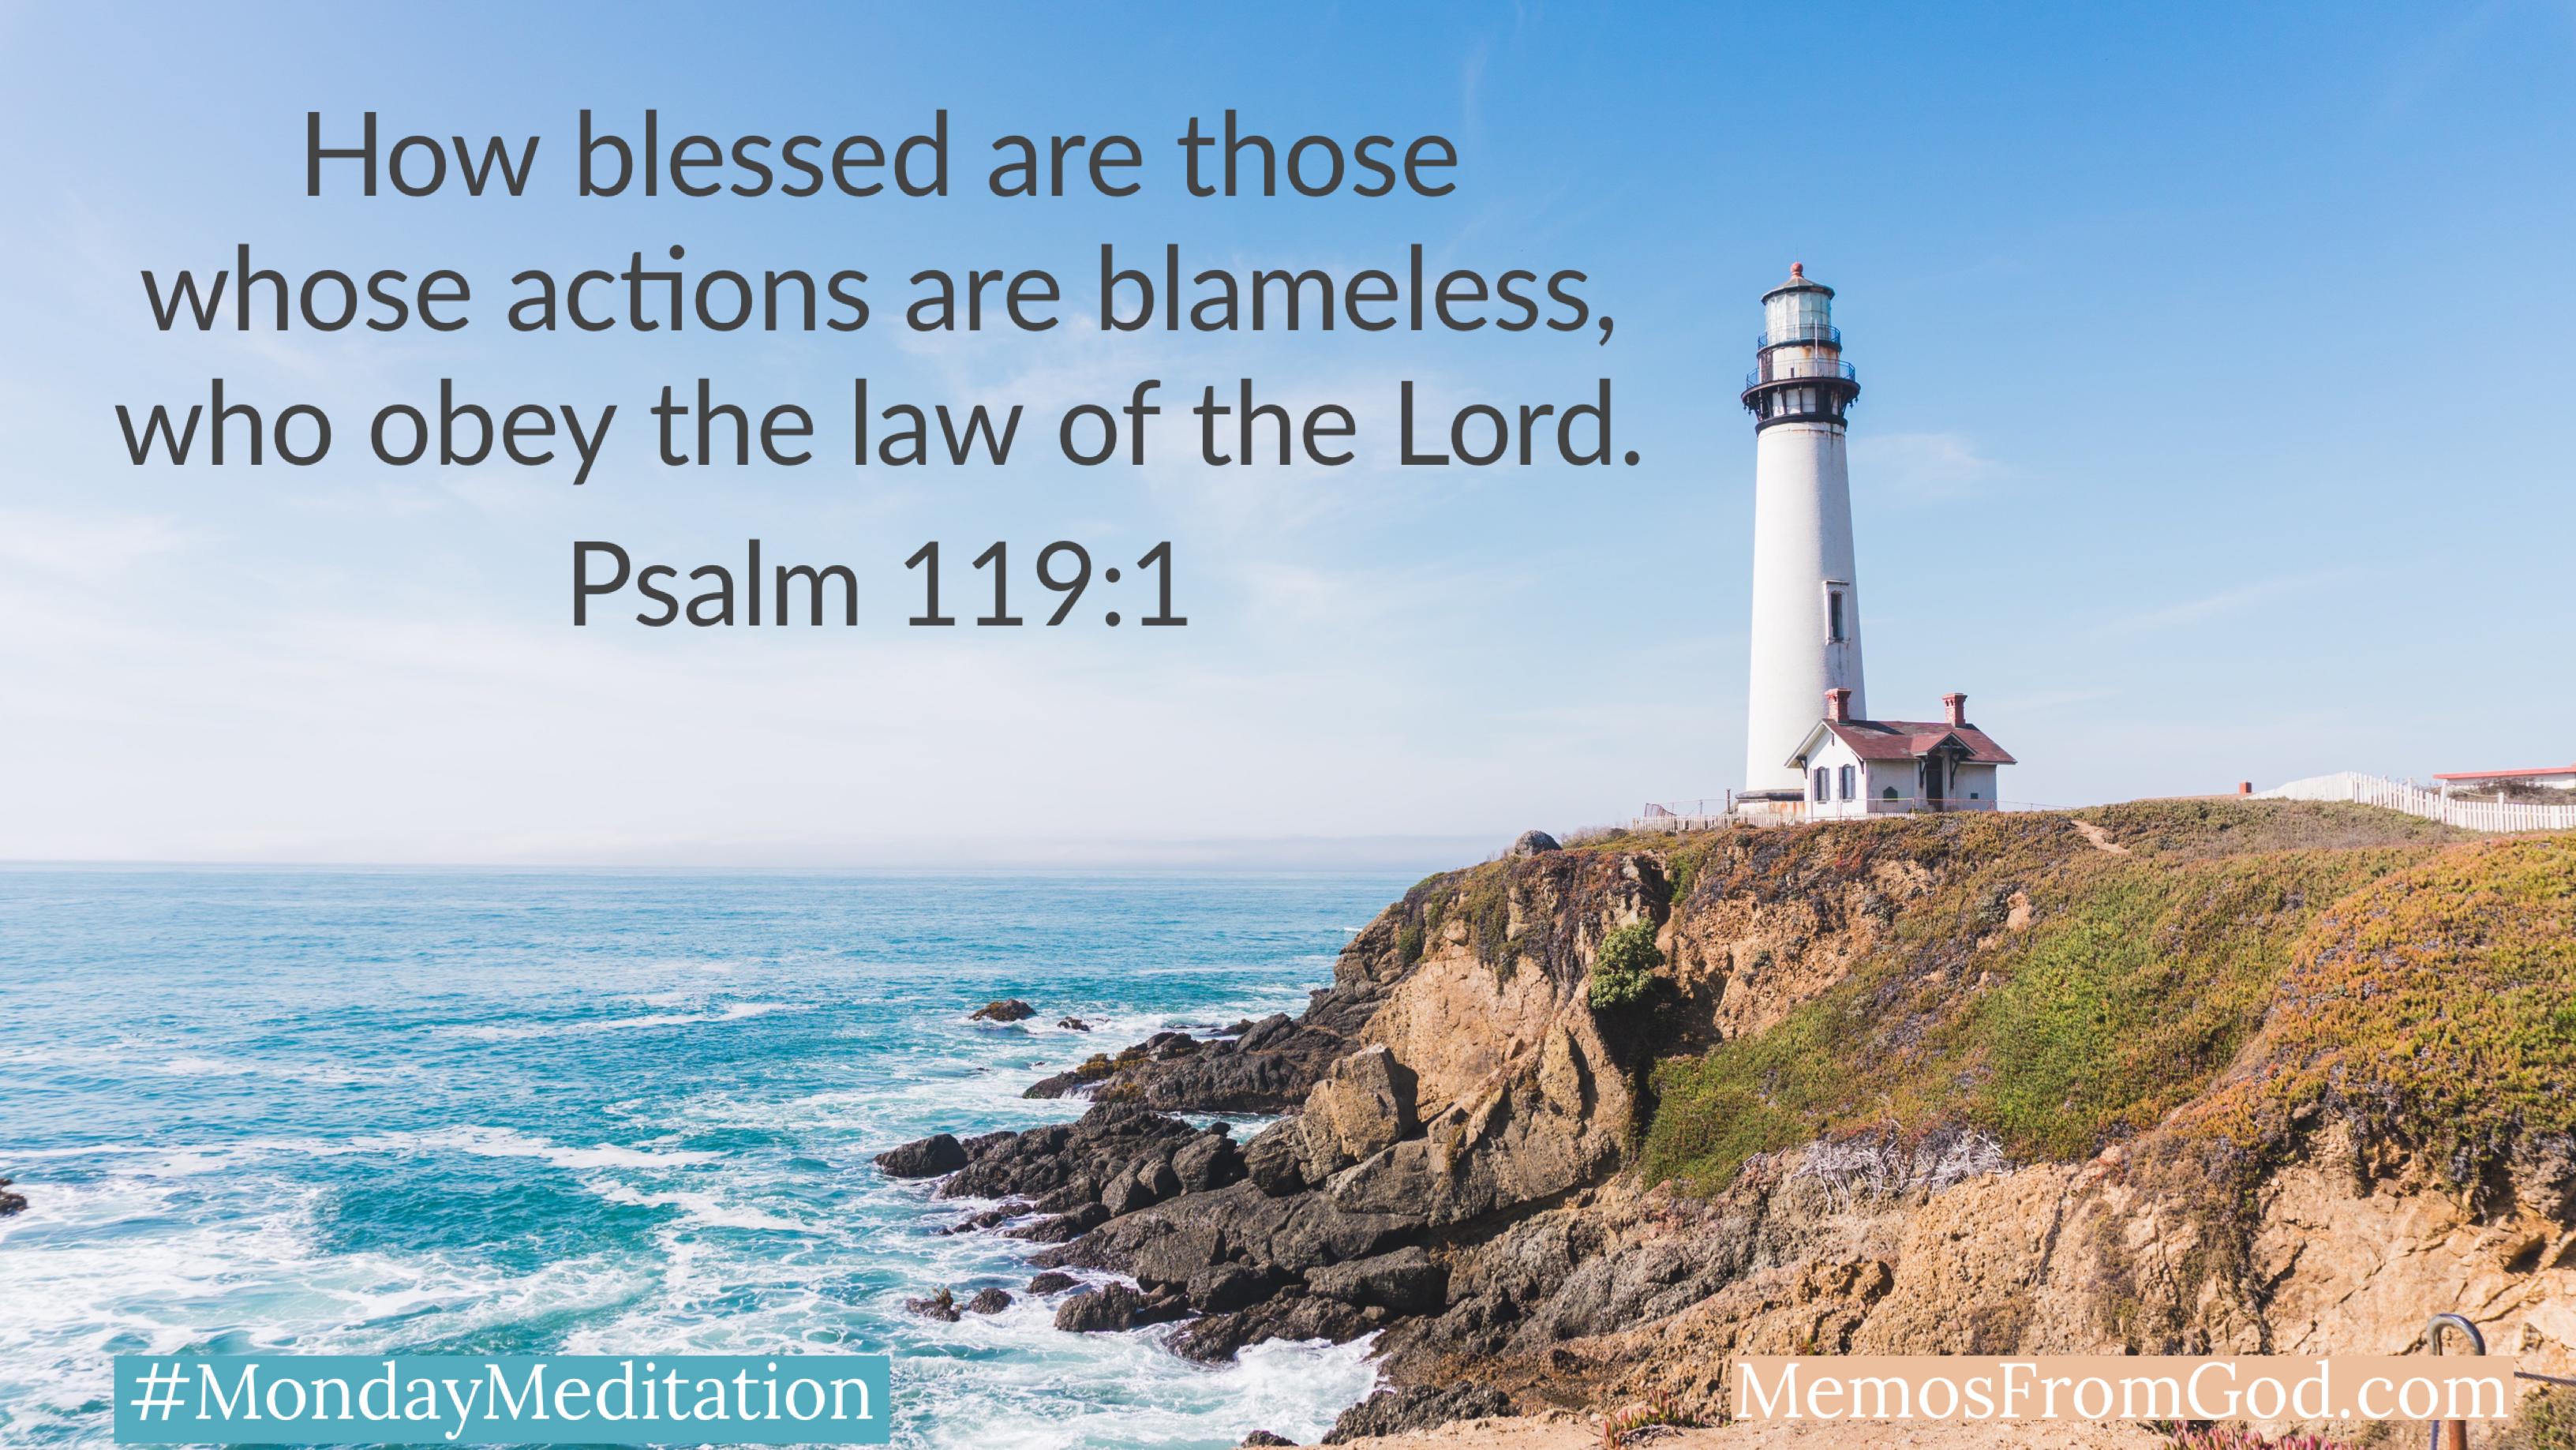 A white lighthouse with a small house stands on a rocky shore overlooking teal water with whitecaps. Caption: How blessed are those whose actions are blameless, who obey the law of the Lord. Psalm 119:1